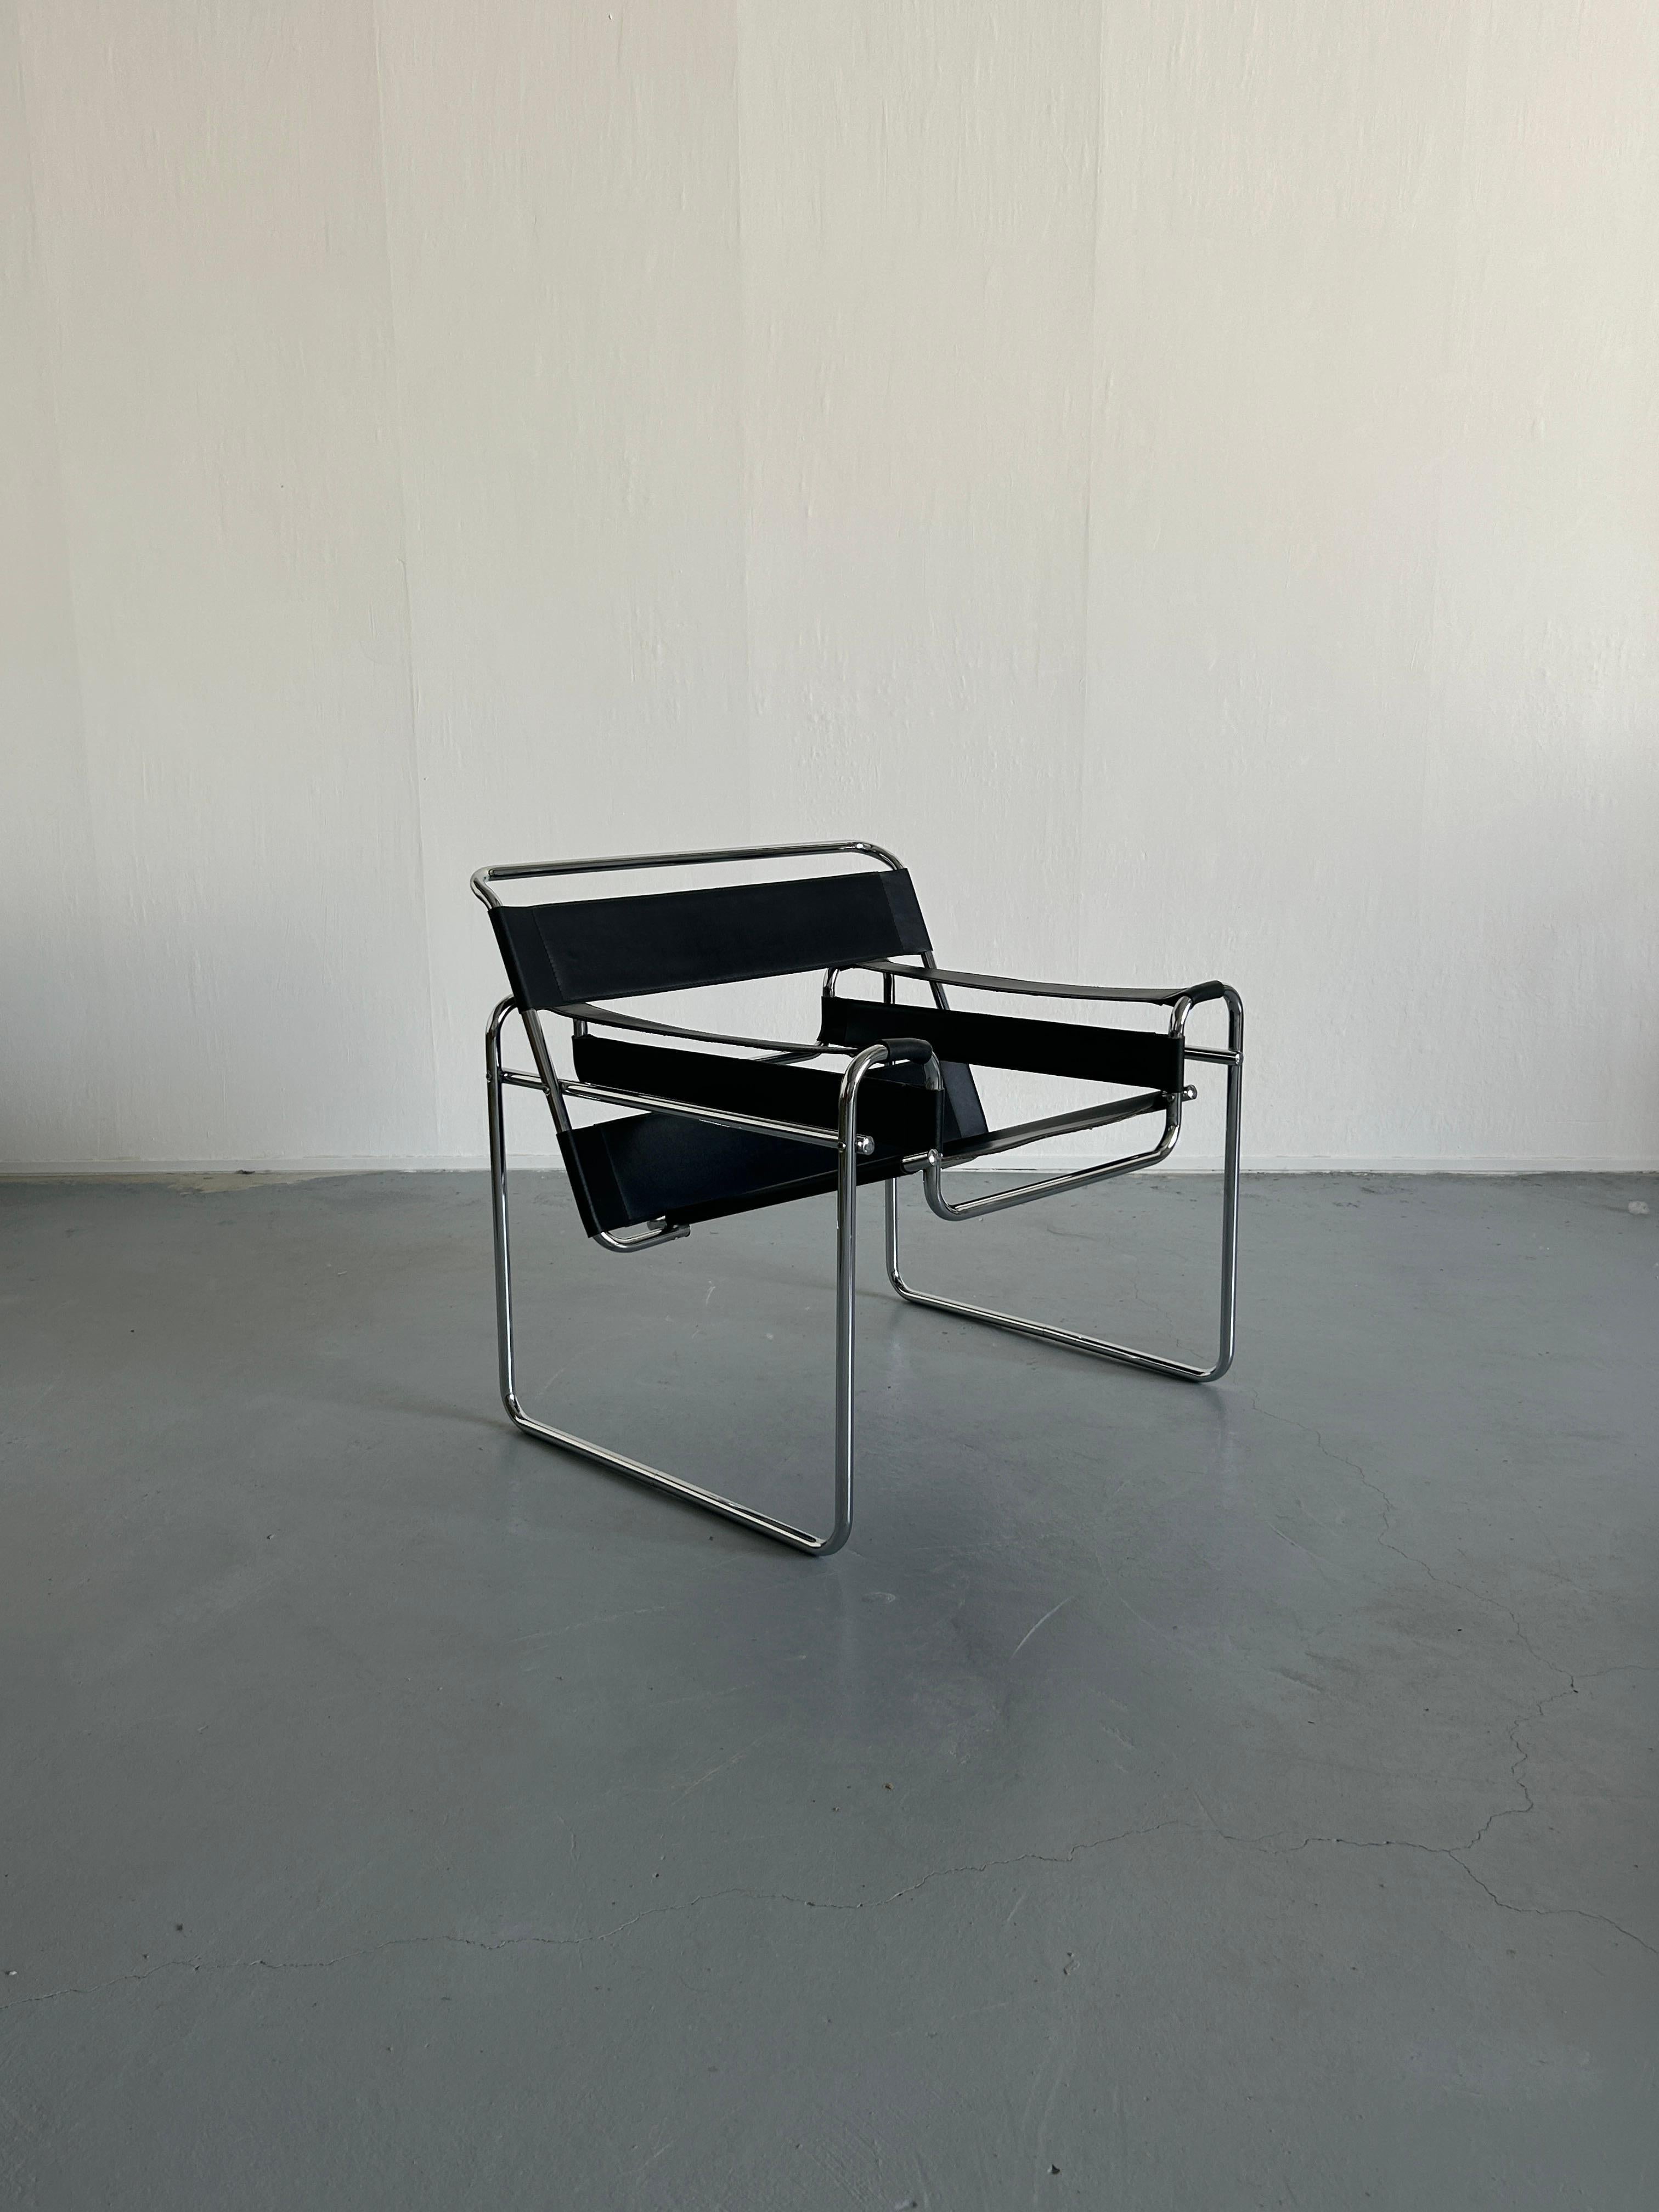 The iconic Wassily armchair designed by Marcel Breuer in 1925-1926, also known as the 'B3' chair. 
Unknown, but quality vintage Italian production, circa 1970s. 

Made from thick leather and chrome.

Overall in good vintage condition with some